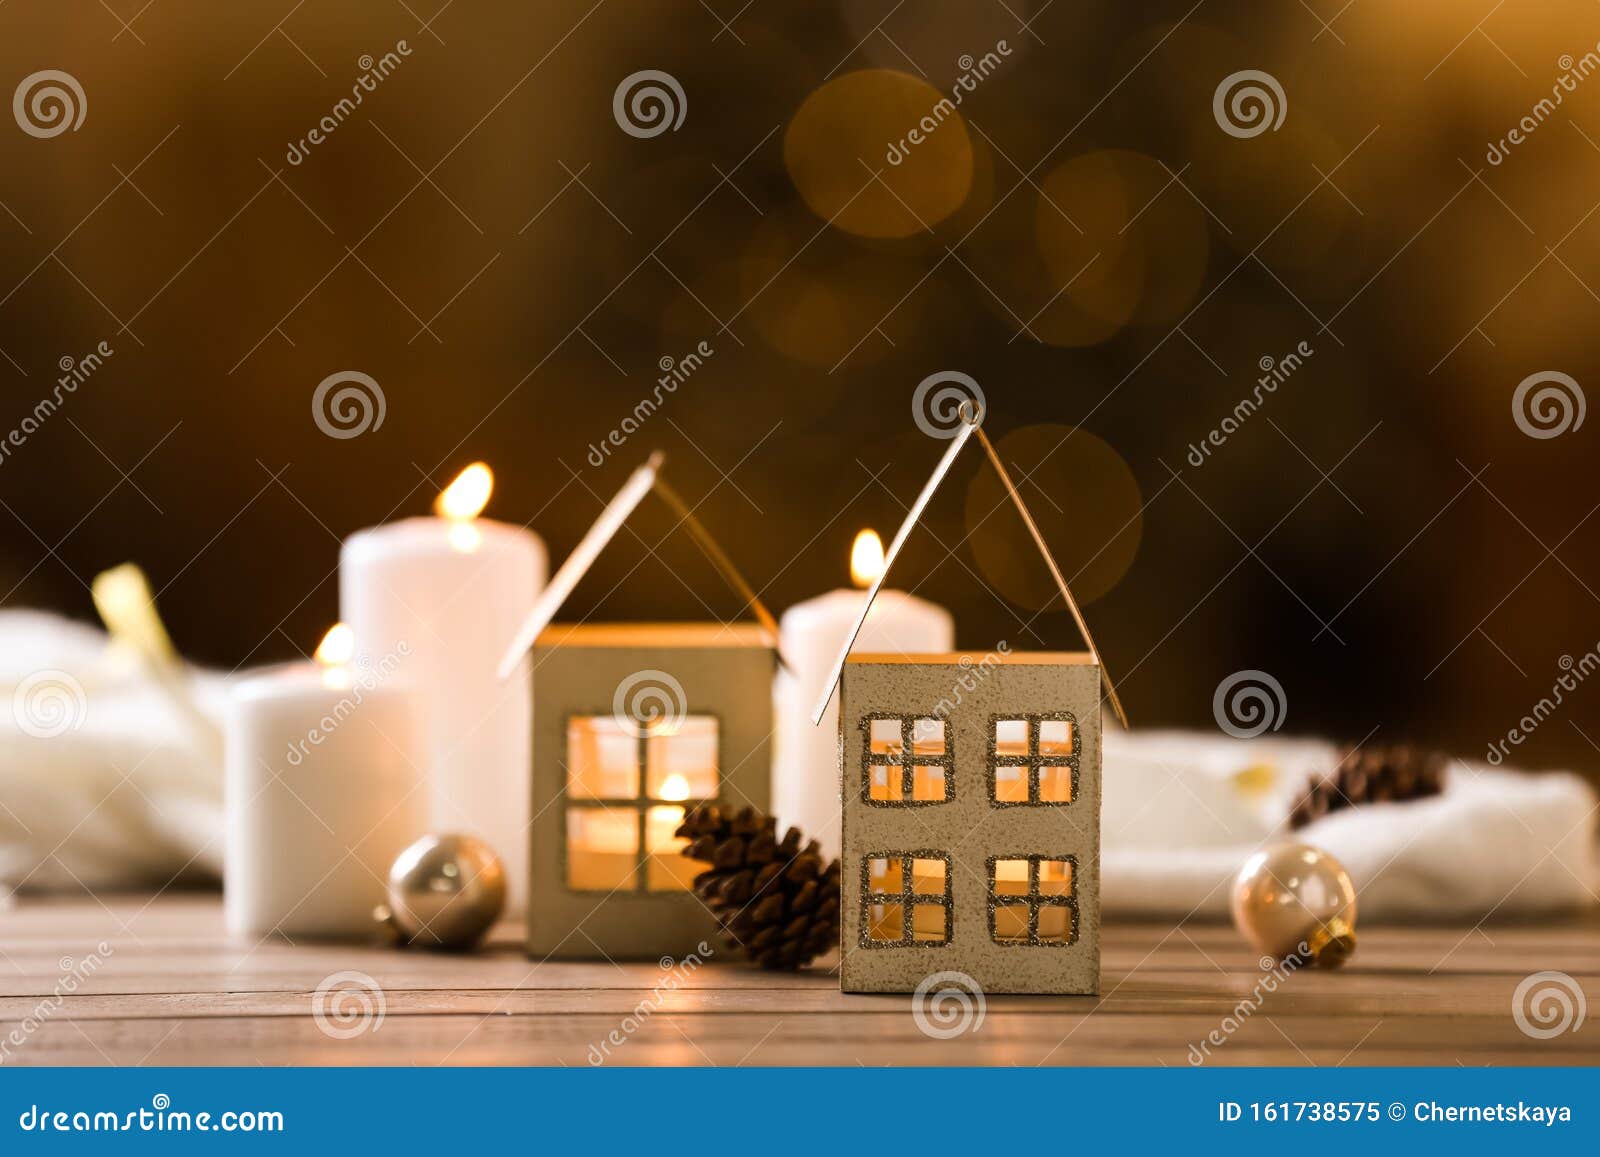 Composition With House Shaped Candle Holder On Table Against Blurred ...